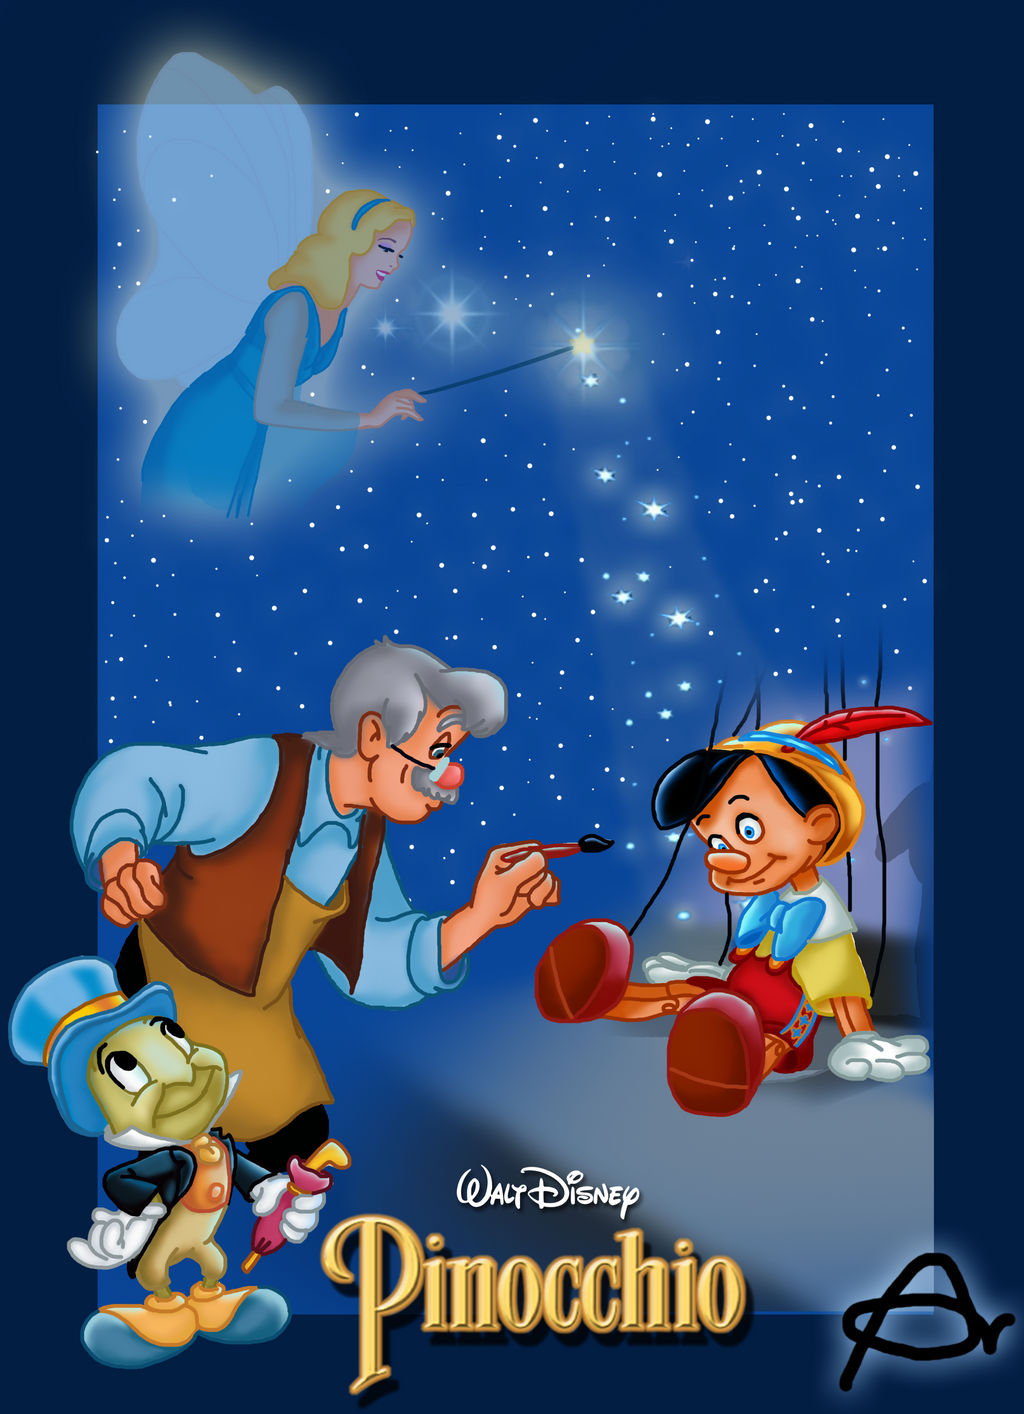 Pinocchio Movie Poster by Roo-Pooh on DeviantArt